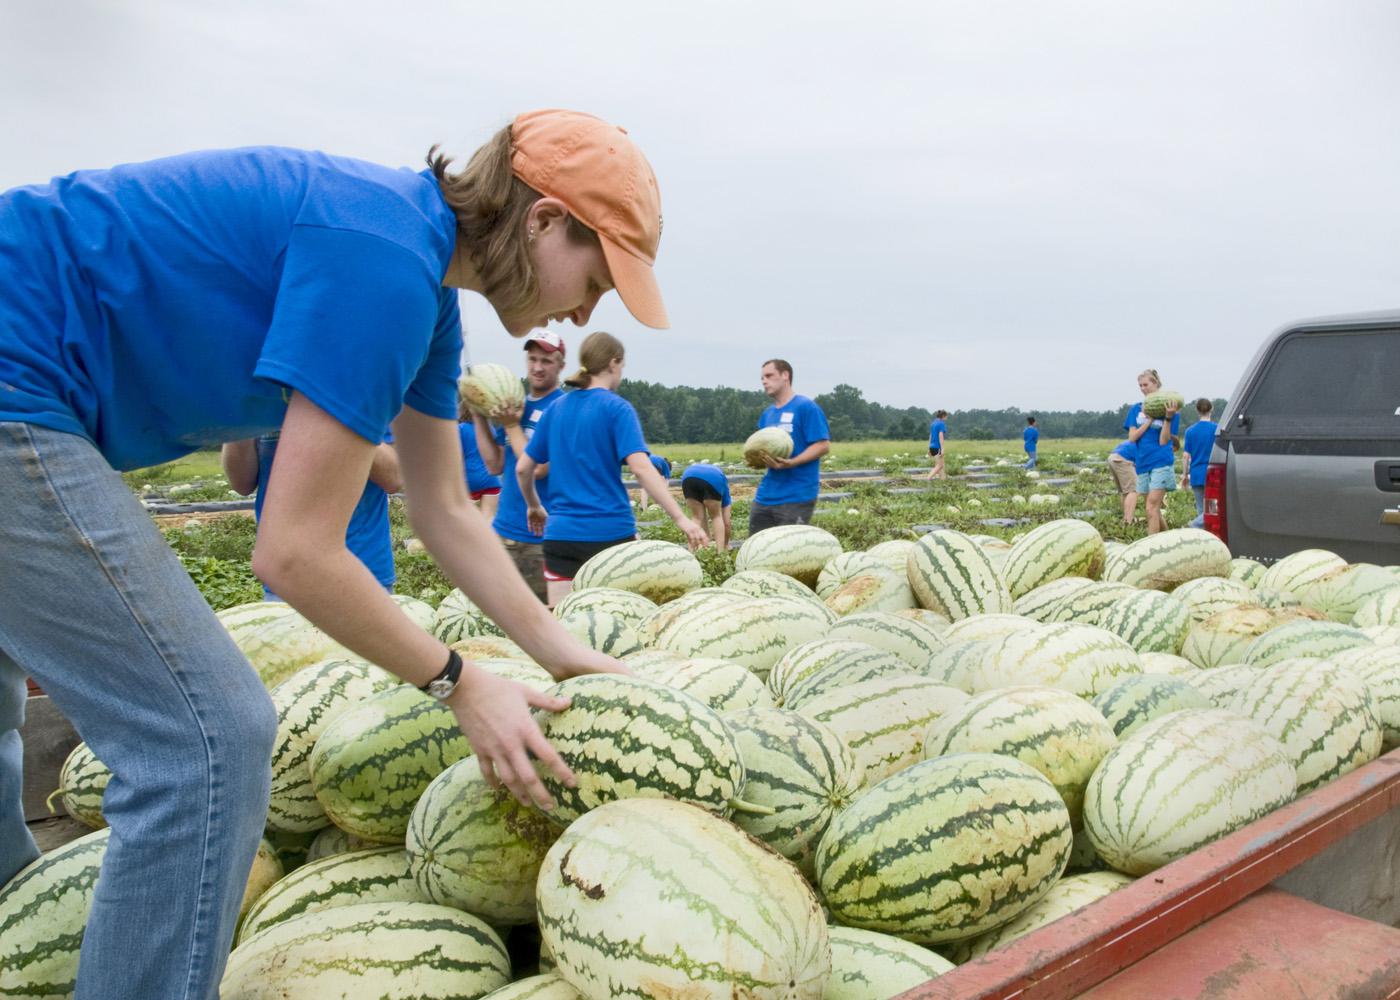 Mississippi State University student Margaret Wilson of Brandon loads watermelons onto a trailer headed for area food pantries. Wilson and other members of Service DAWGS, a new community service student initiative, picked melons left over from harvest on the Farm Fresh fields in Webster County. (Photo by Marco Nicovich)